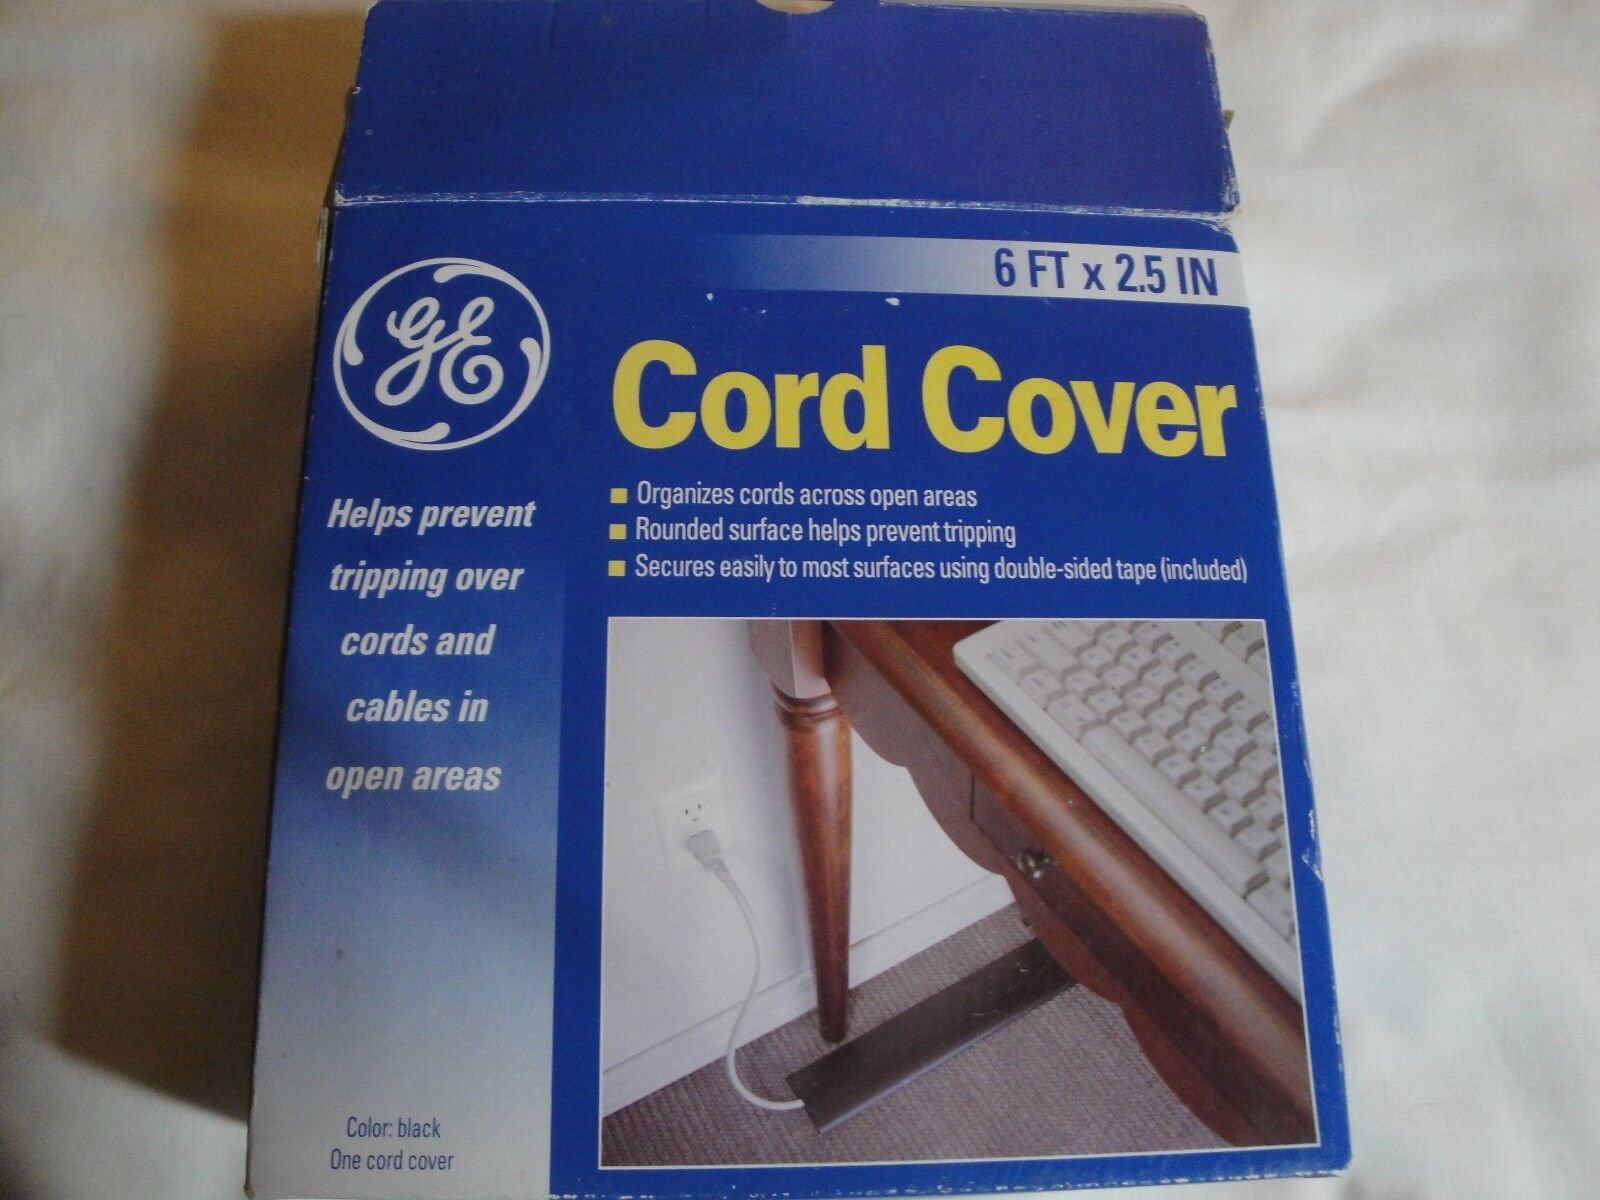 GE 50620 - 6ft PVC Cord Cover - Black. 6 FT X 205 IN. Prevent Tripping on Cords